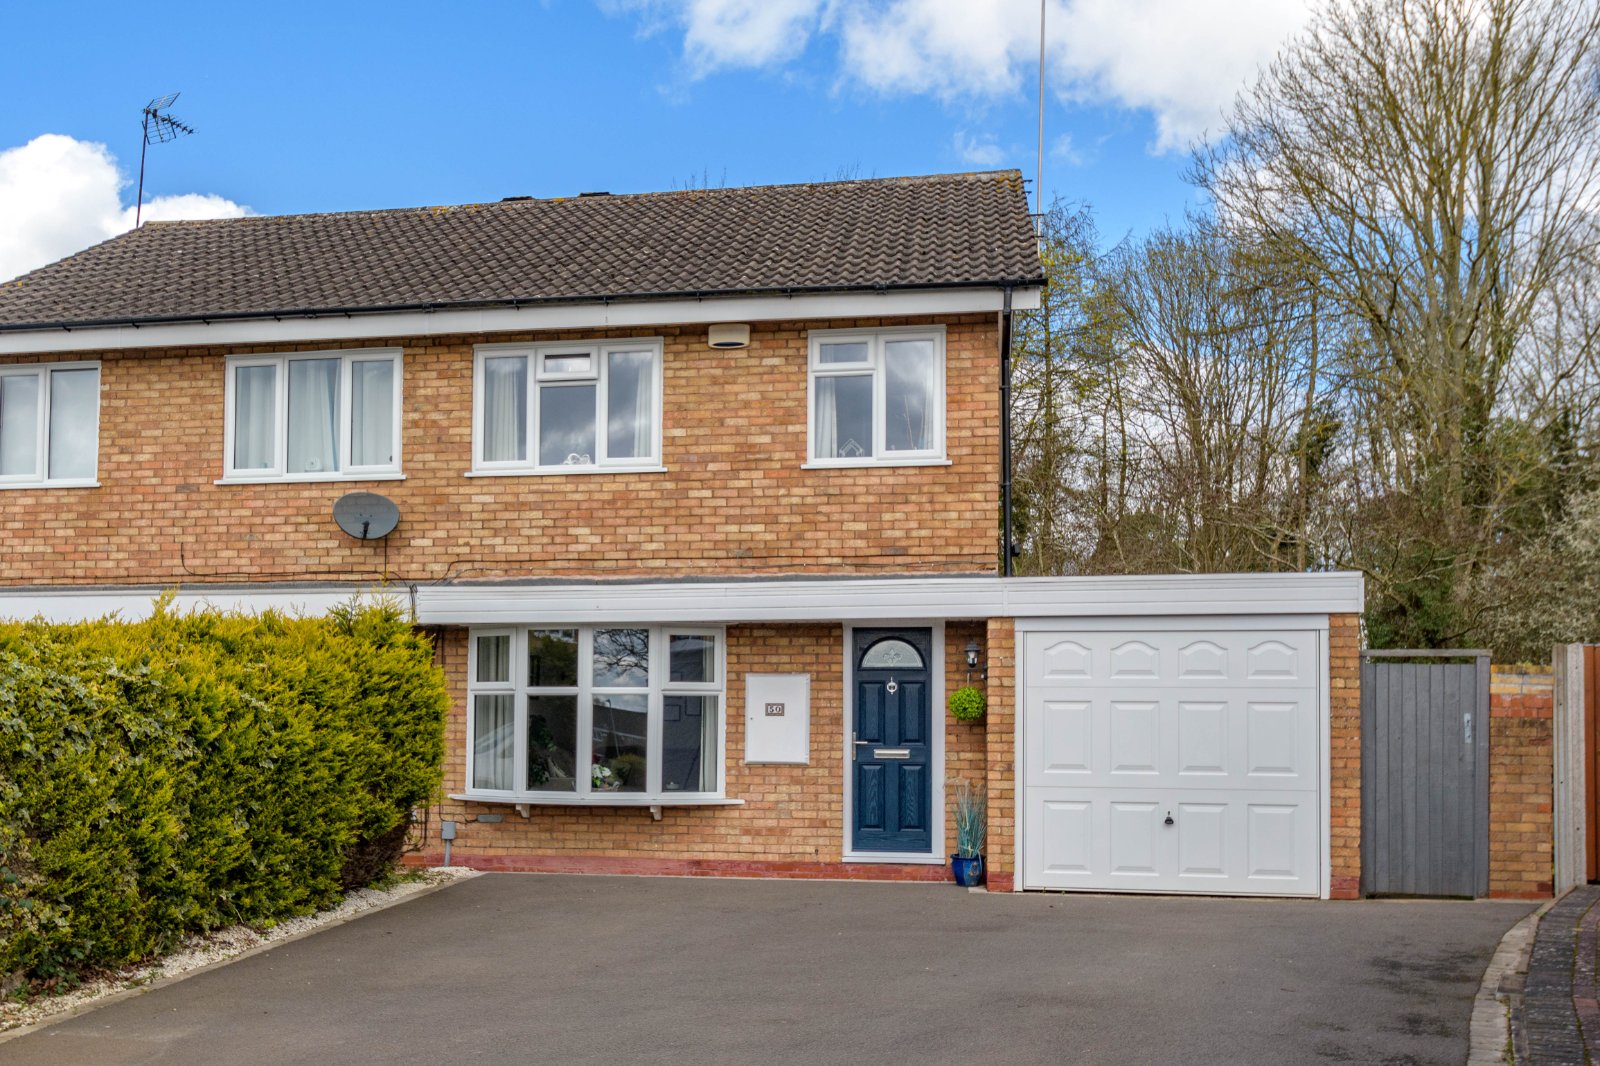 3 bed house for sale in Ledbury Close, Redditch - Property Image 1